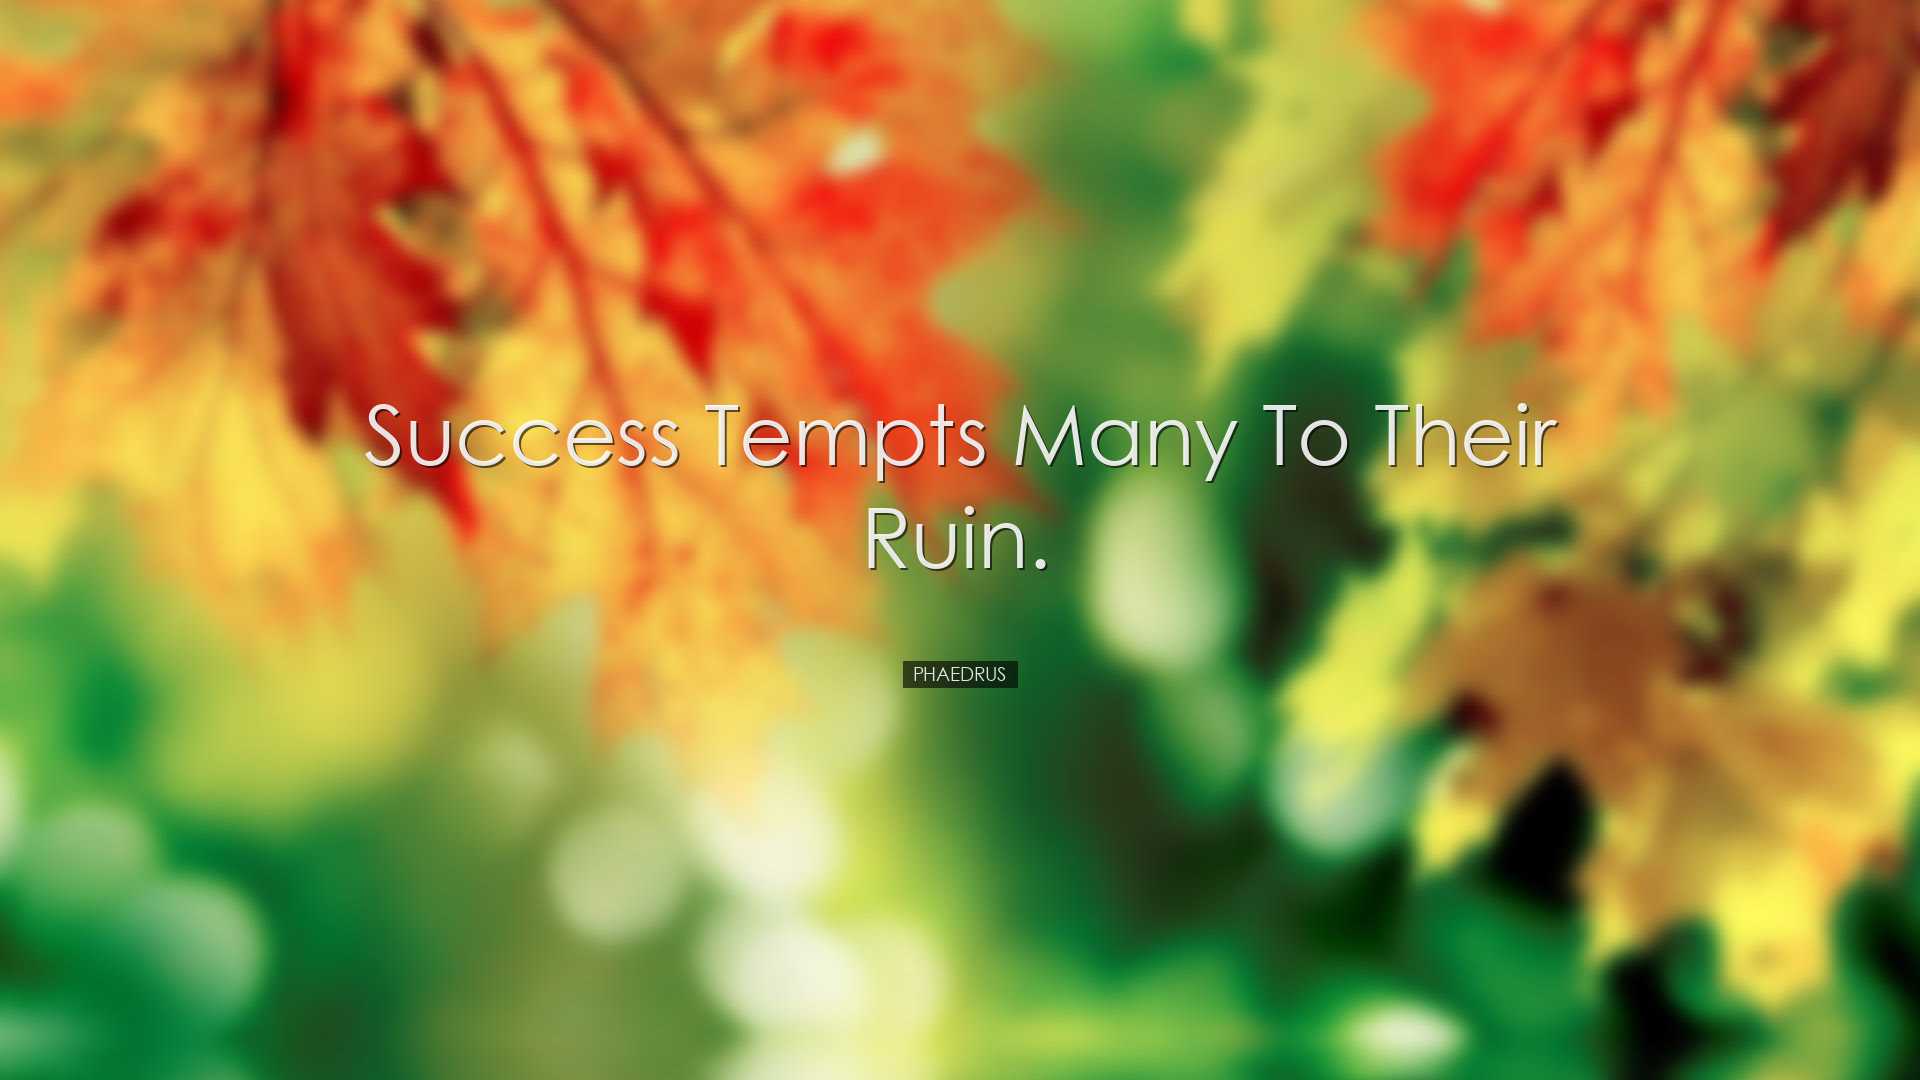 Success tempts many to their ruin. - Phaedrus